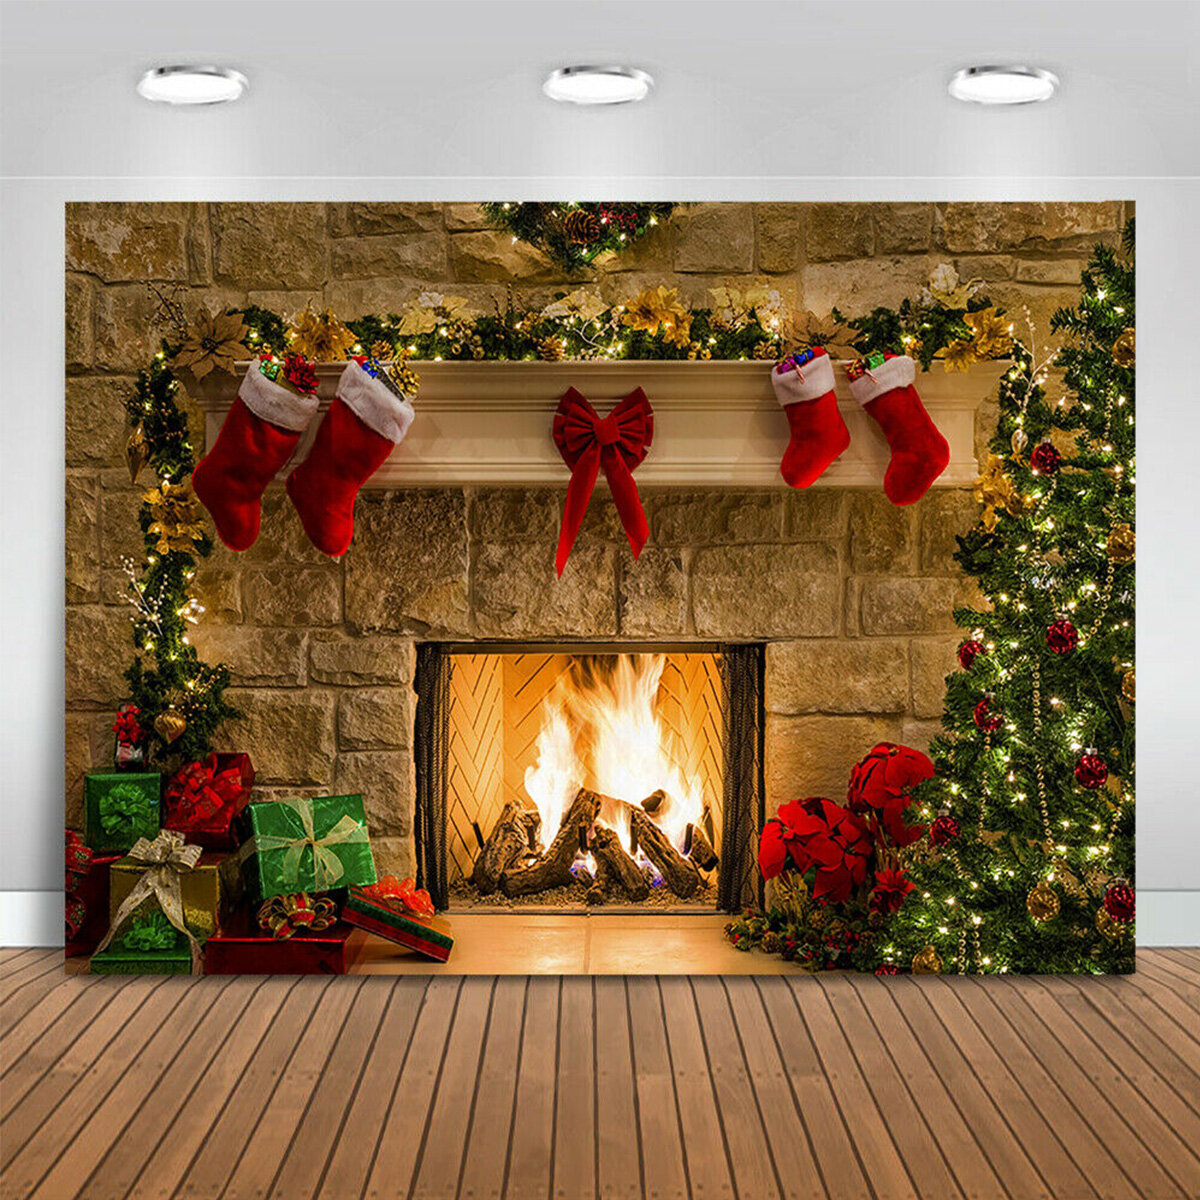 5x3FT 7x5FT 10x7FT Christmas Fireplace Red Socks Backdrop Photography Background Cloth Decoration Ba